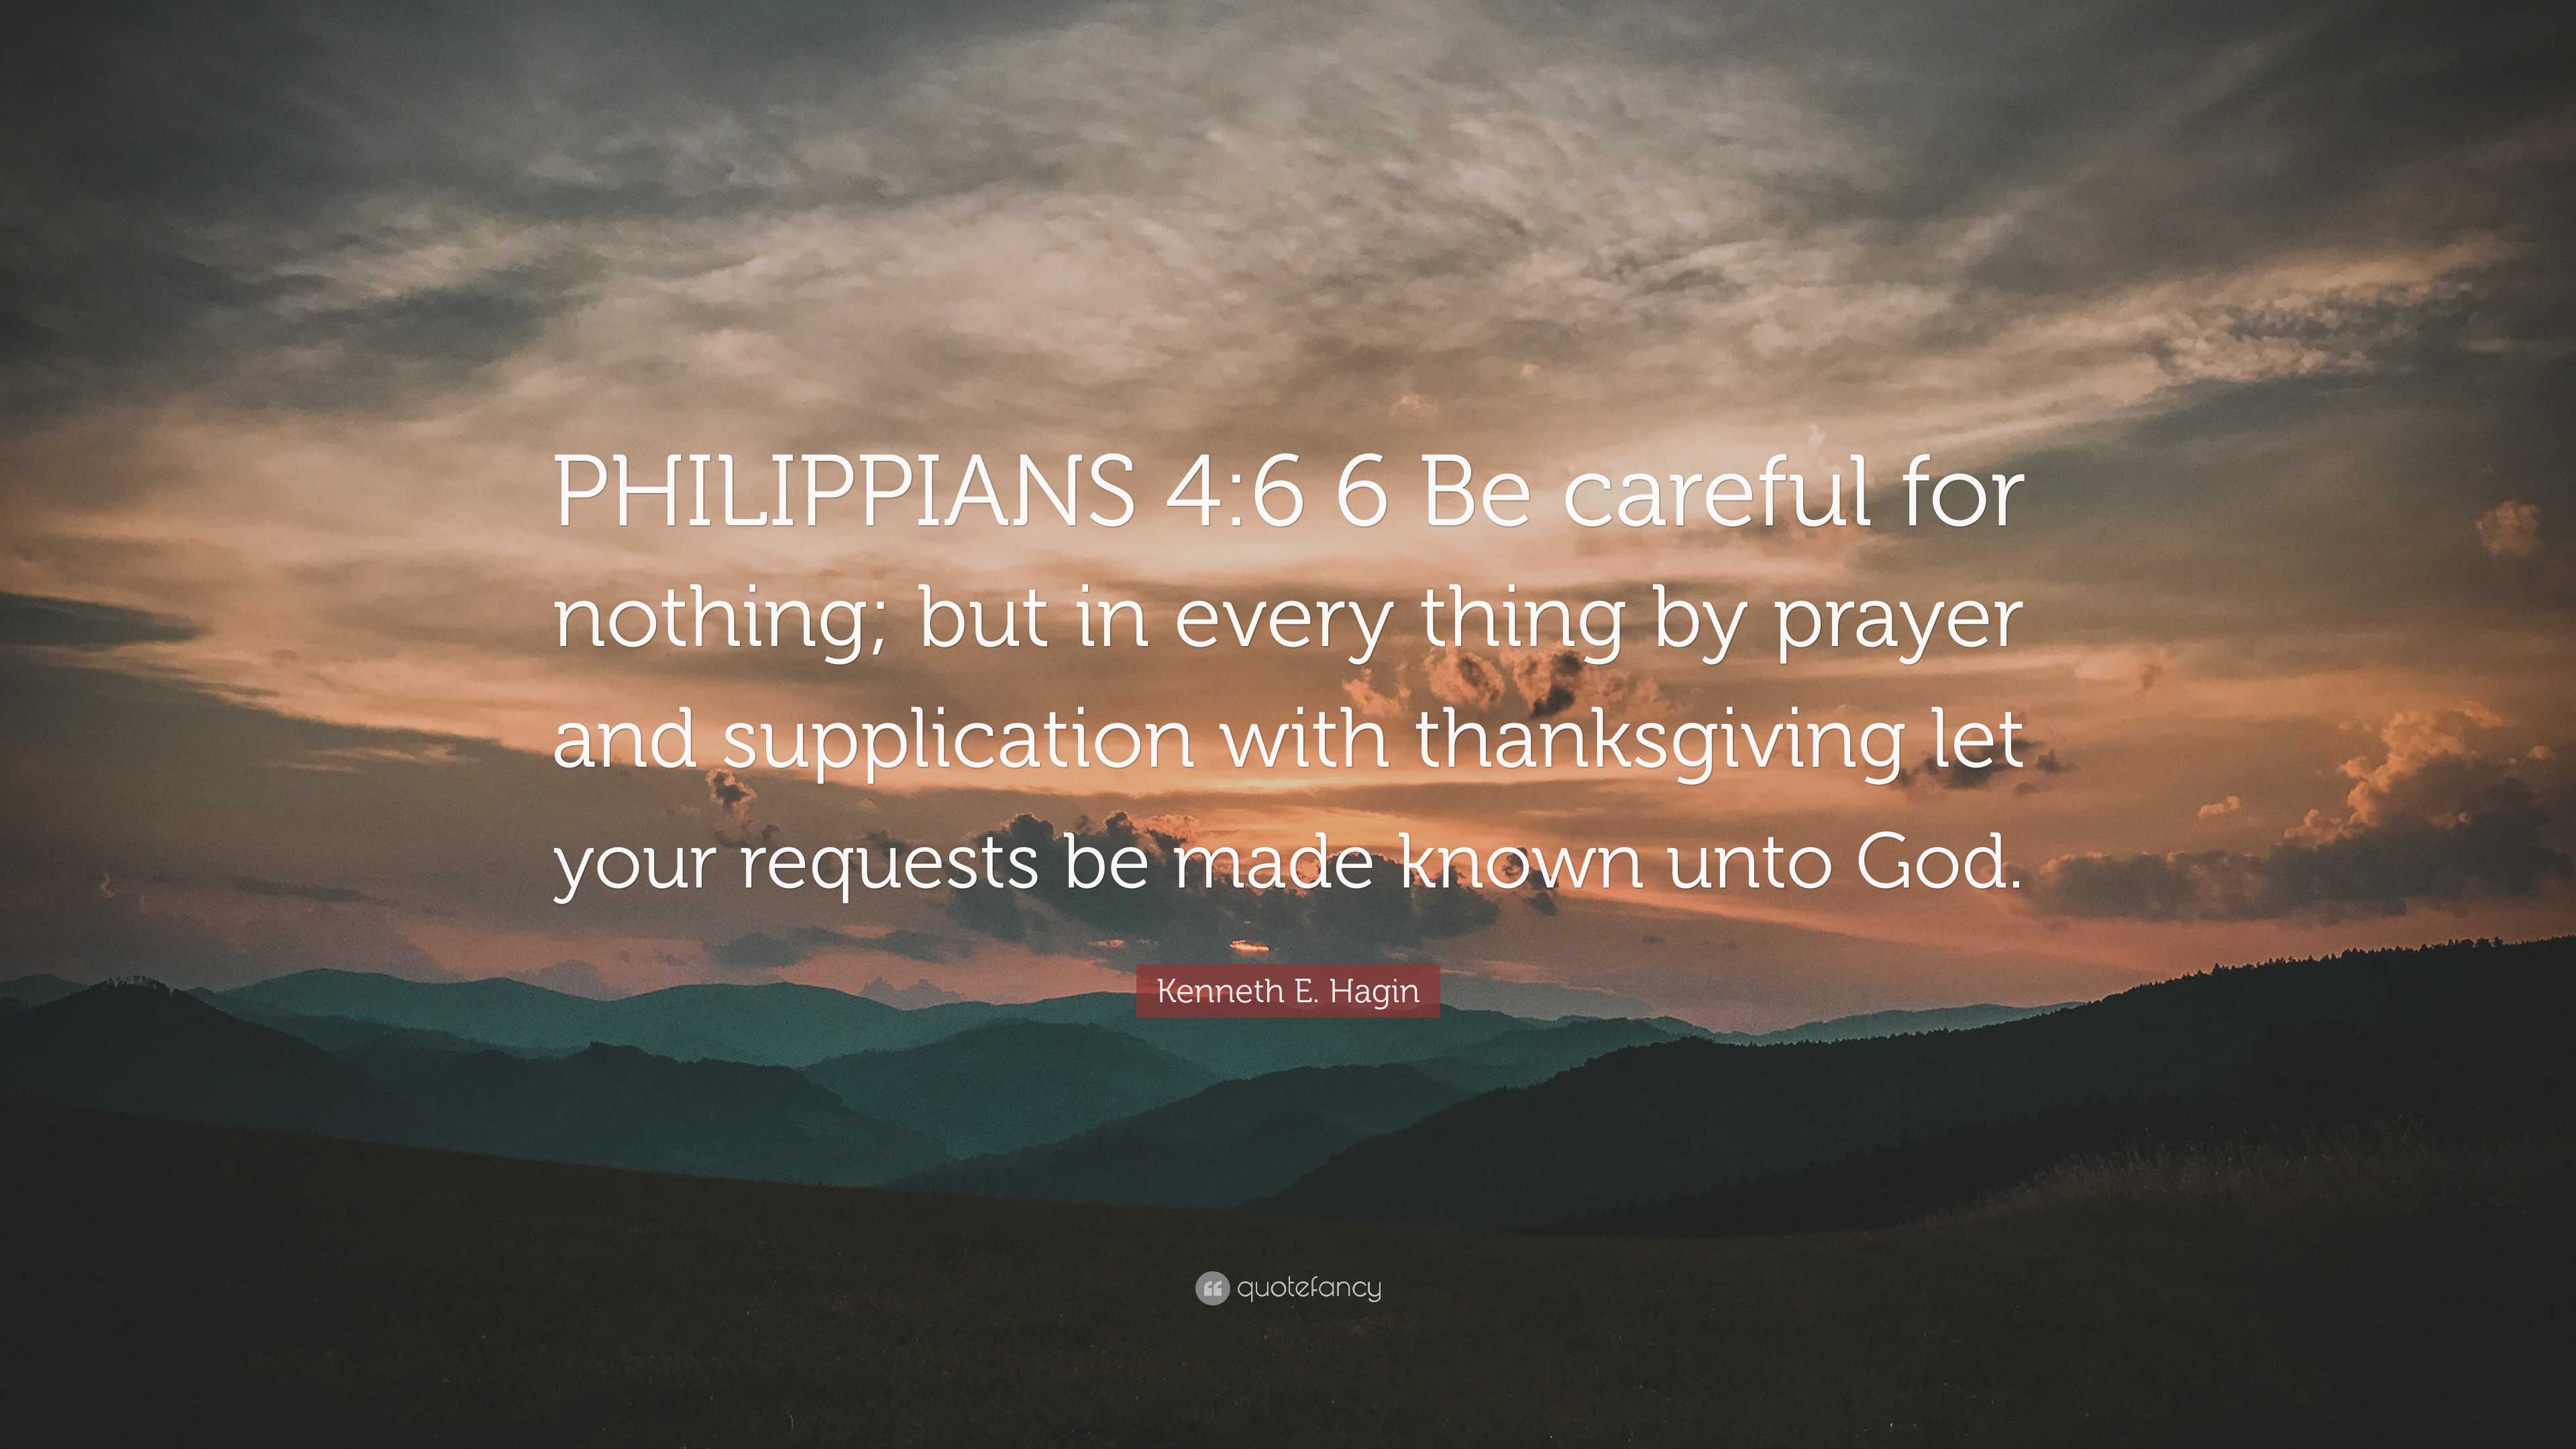 Kenneth E. Hagin Quote: “PHILIPPIANS 4:6 6 Be careful for nothing